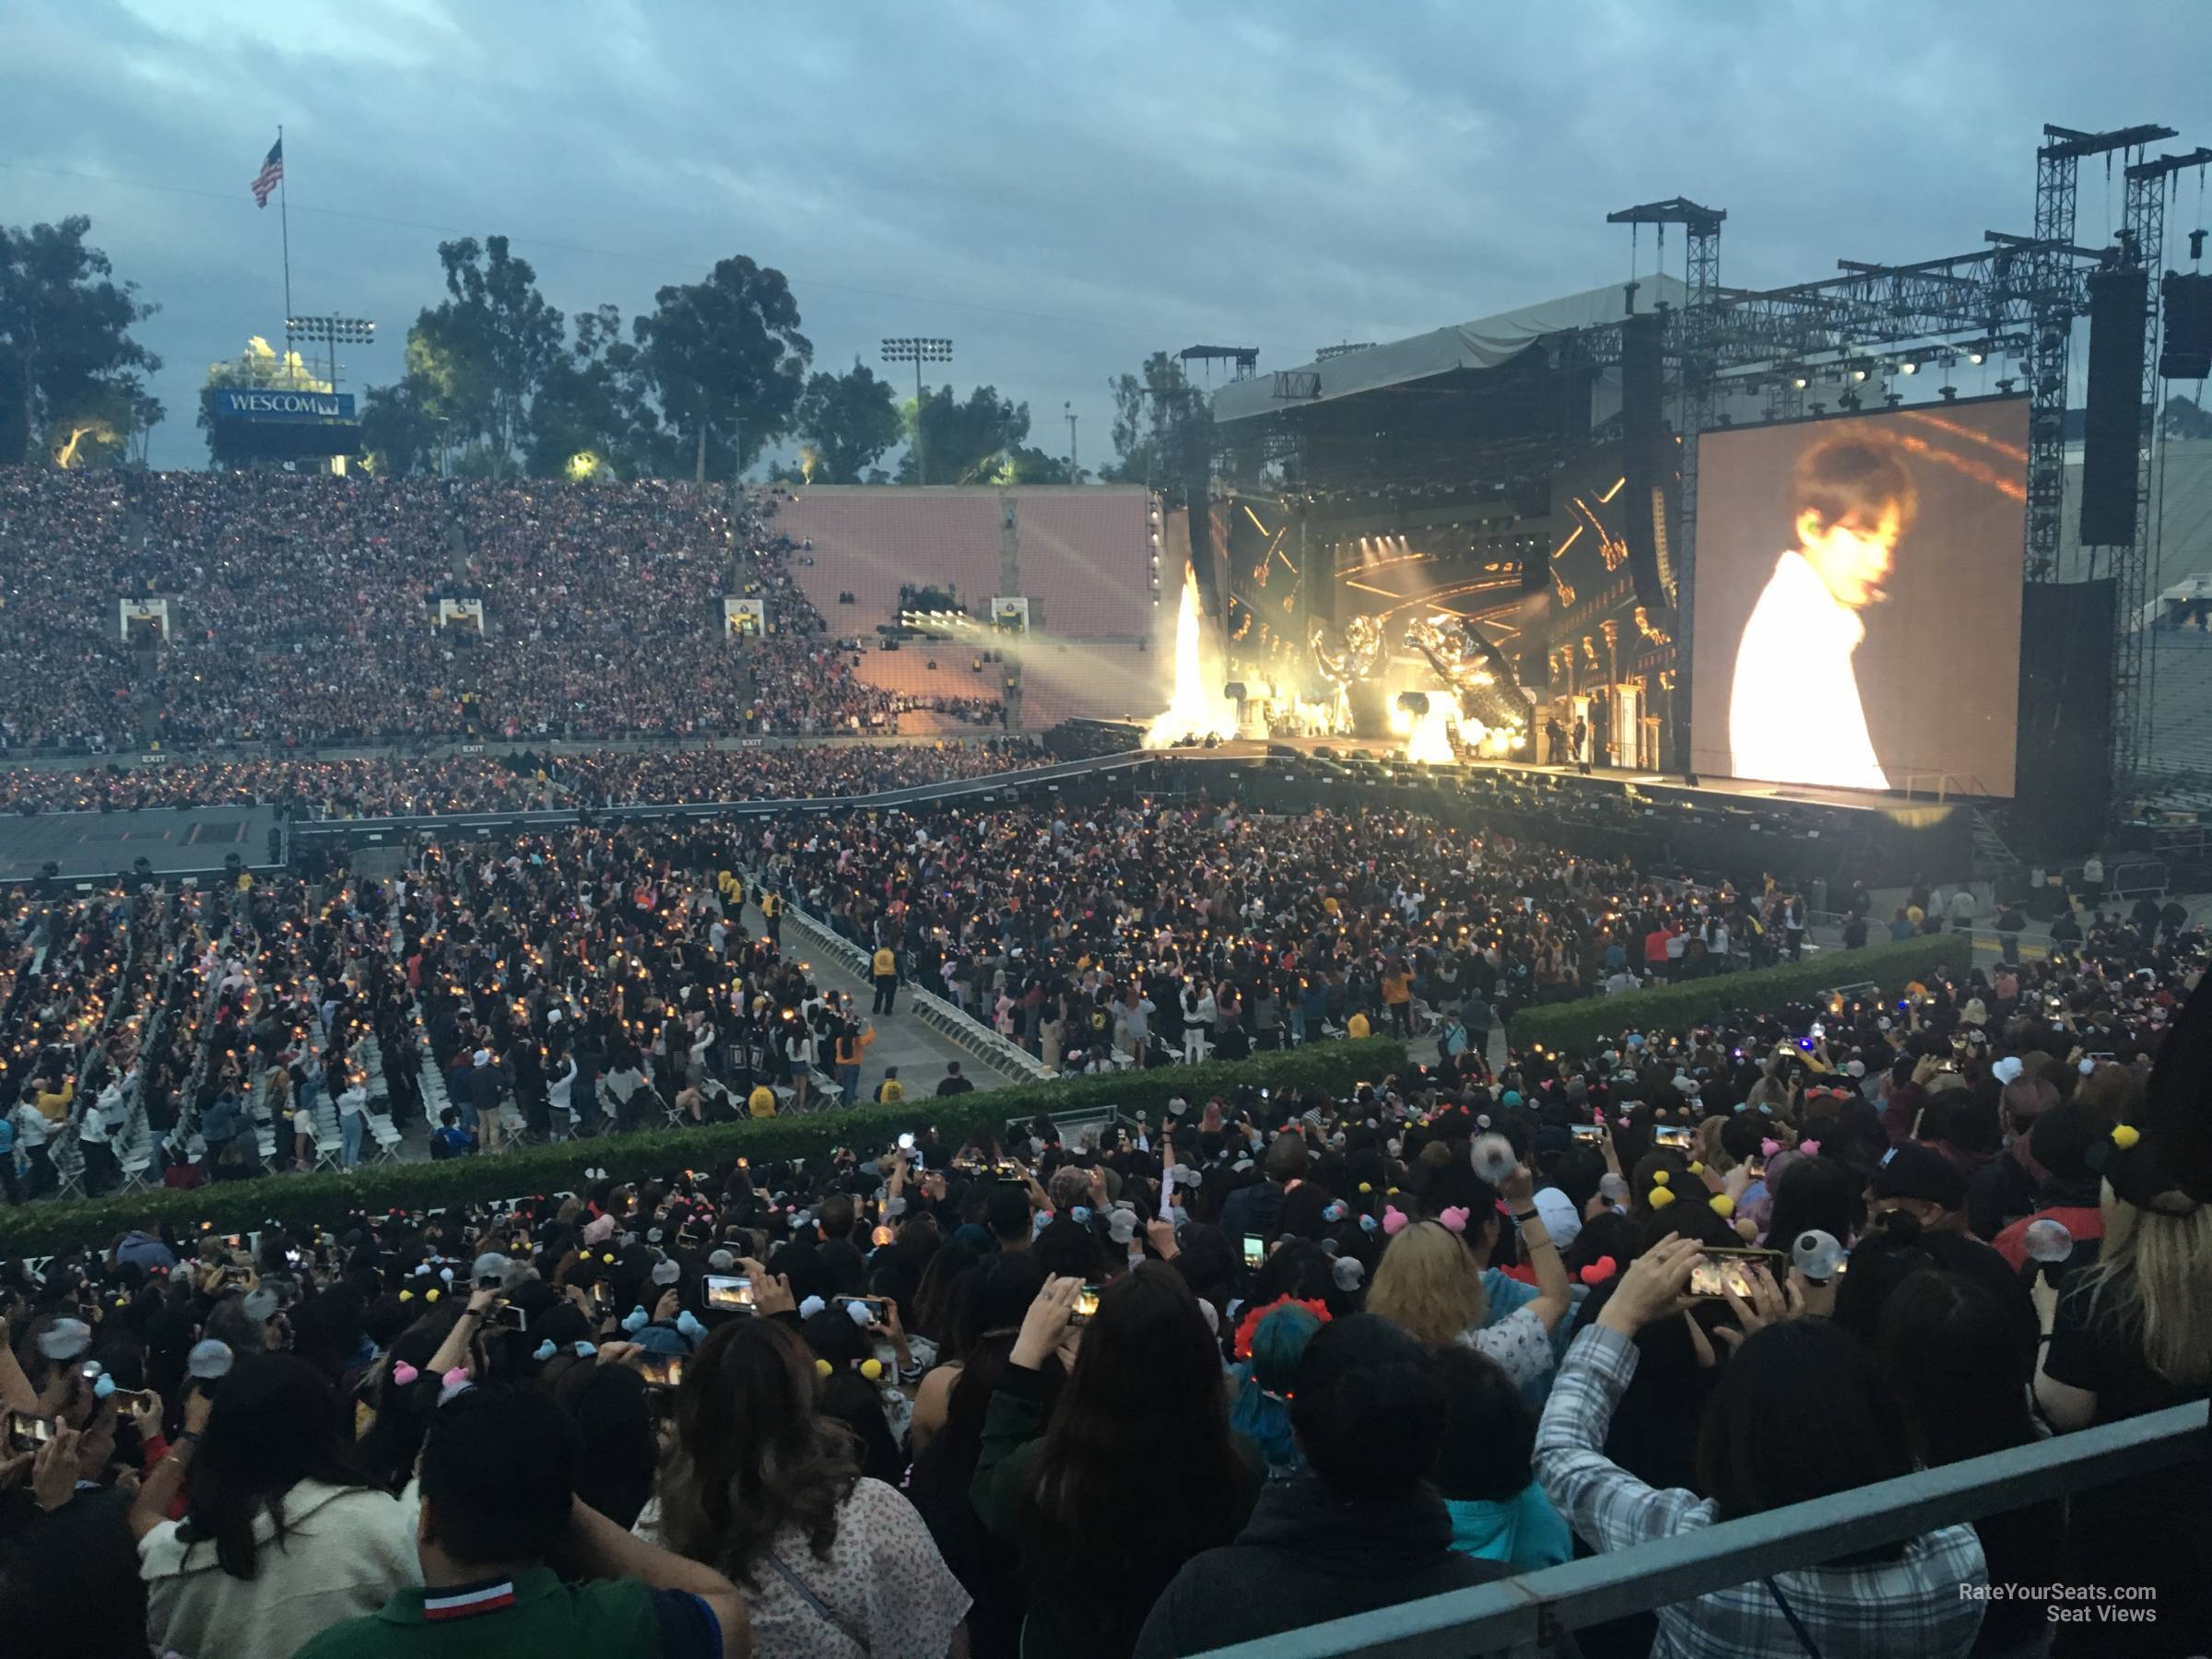 Section 19 at Rose Bowl Stadium for Concerts - RateYourSeats.com